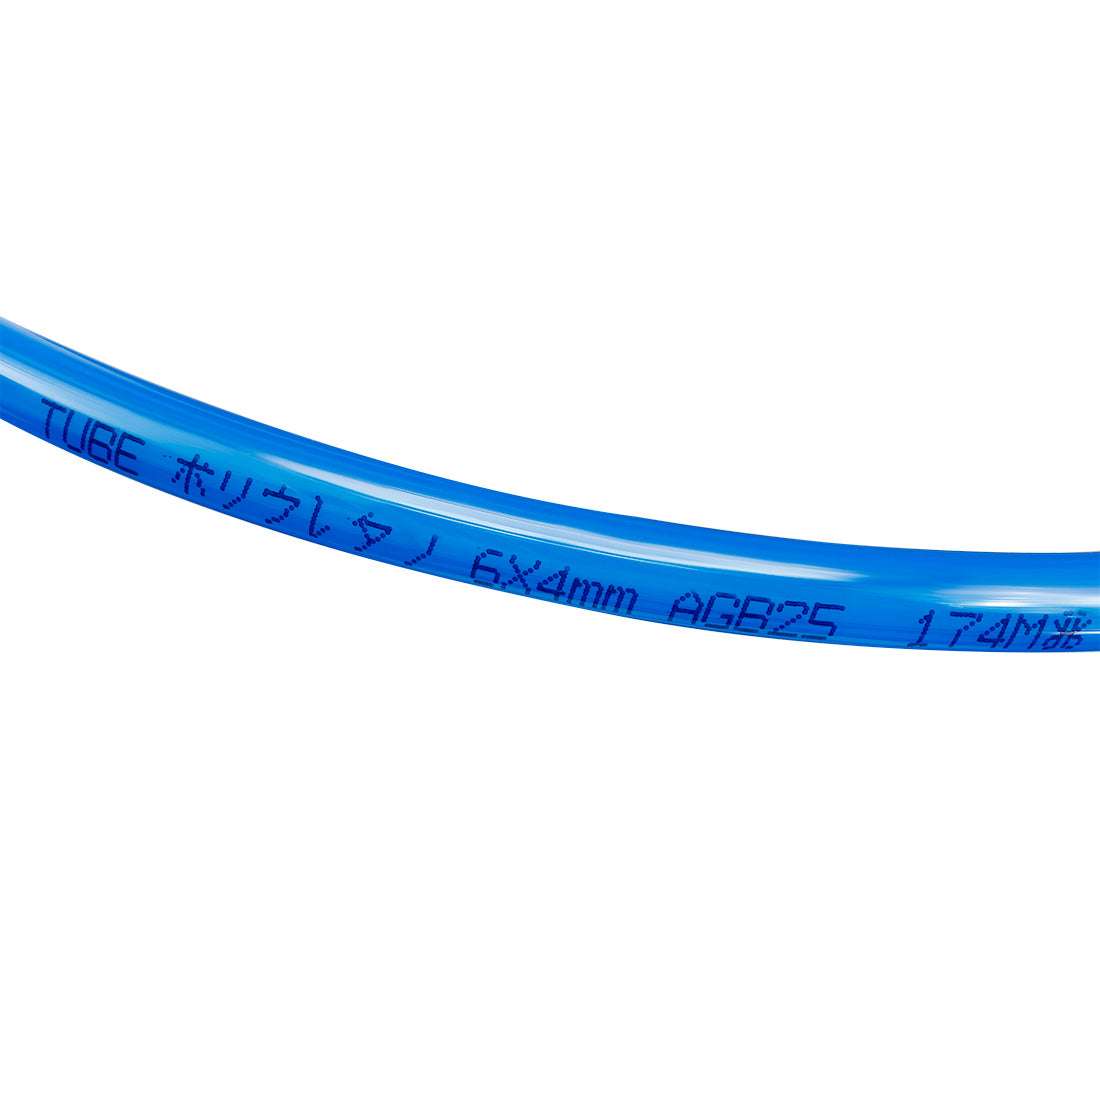 uxcell Uxcell 6mm X 4mm Pneumatic Air PU Hose Pipe Tube 5 Meter 16.4ft Blue